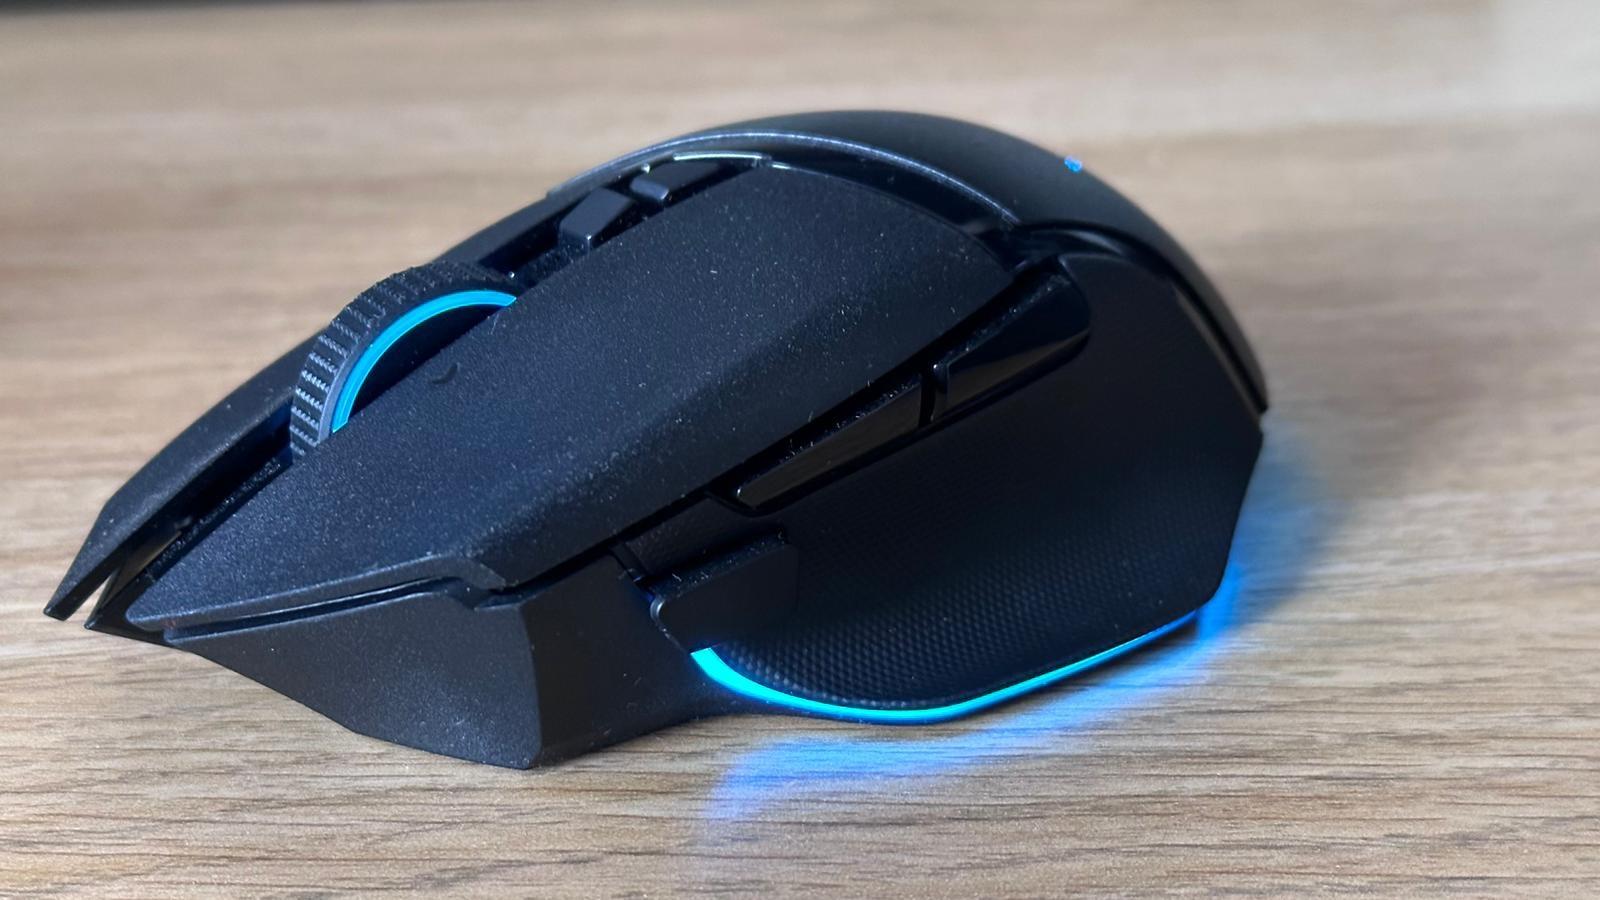 Razer Basilisk V3 Pro review: The ultimate all-round gaming mouse - Dexerto